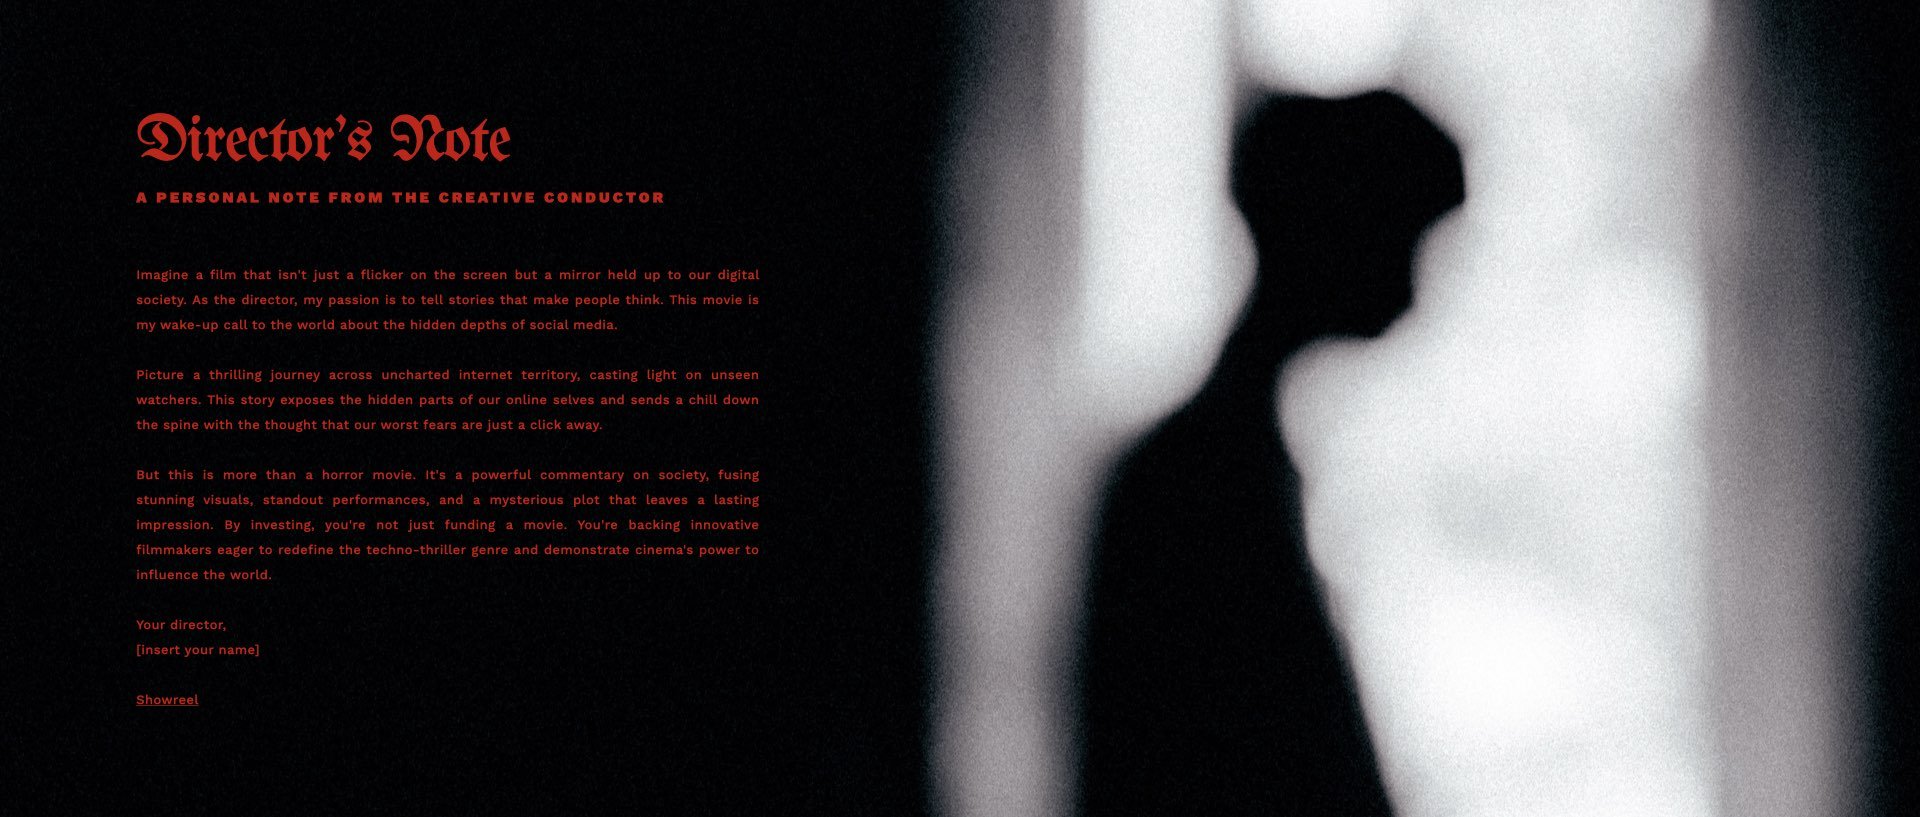 ‎Film Pitch Deck Template - Sinister Obsession.‎035.jpeg